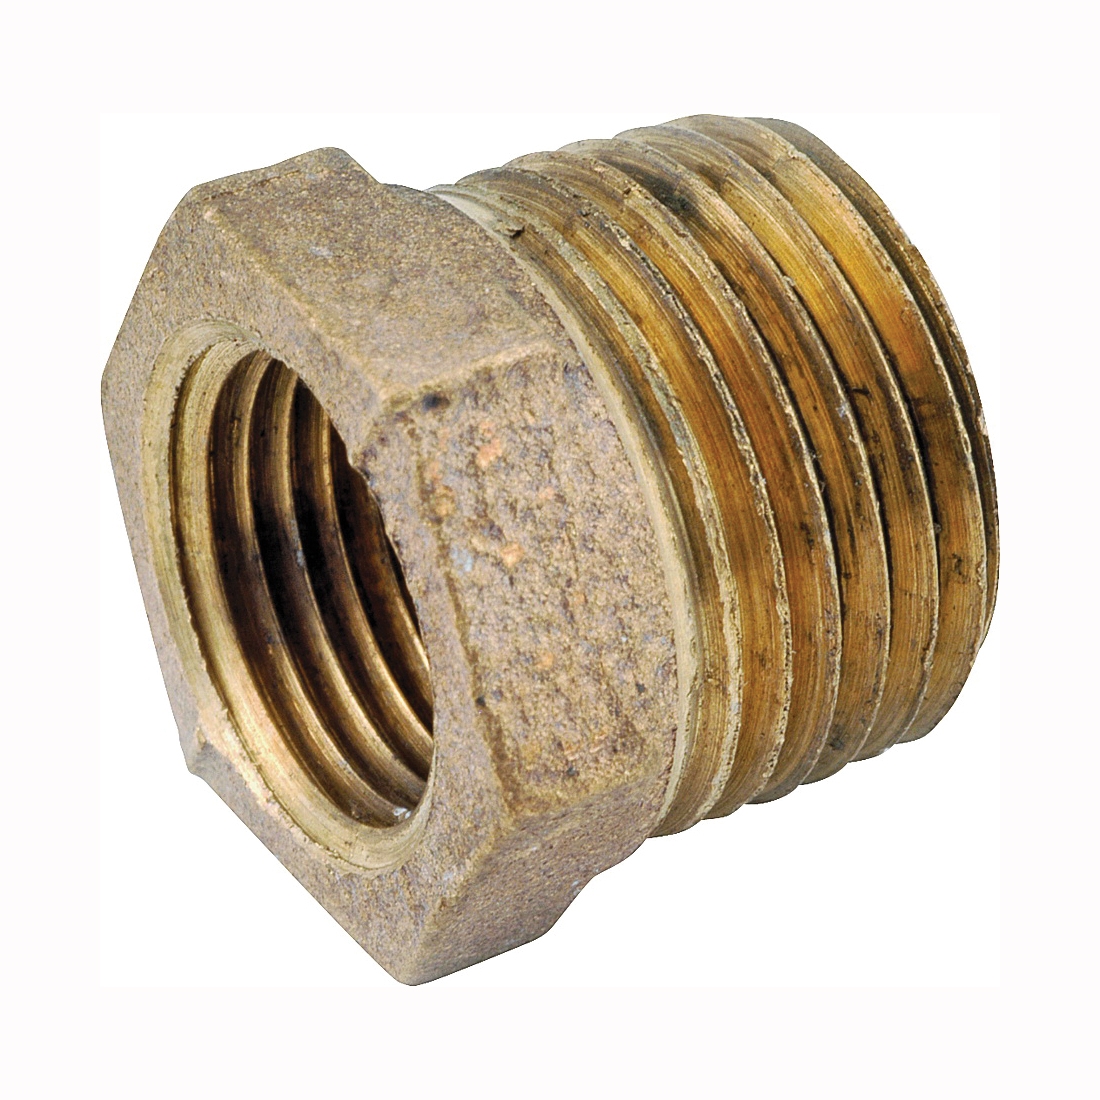 Anderson Metals 738110-1608 Reducing Pipe Bushing, 1 x 1/2 in, Male x Female, 200 psi Pressure - 1